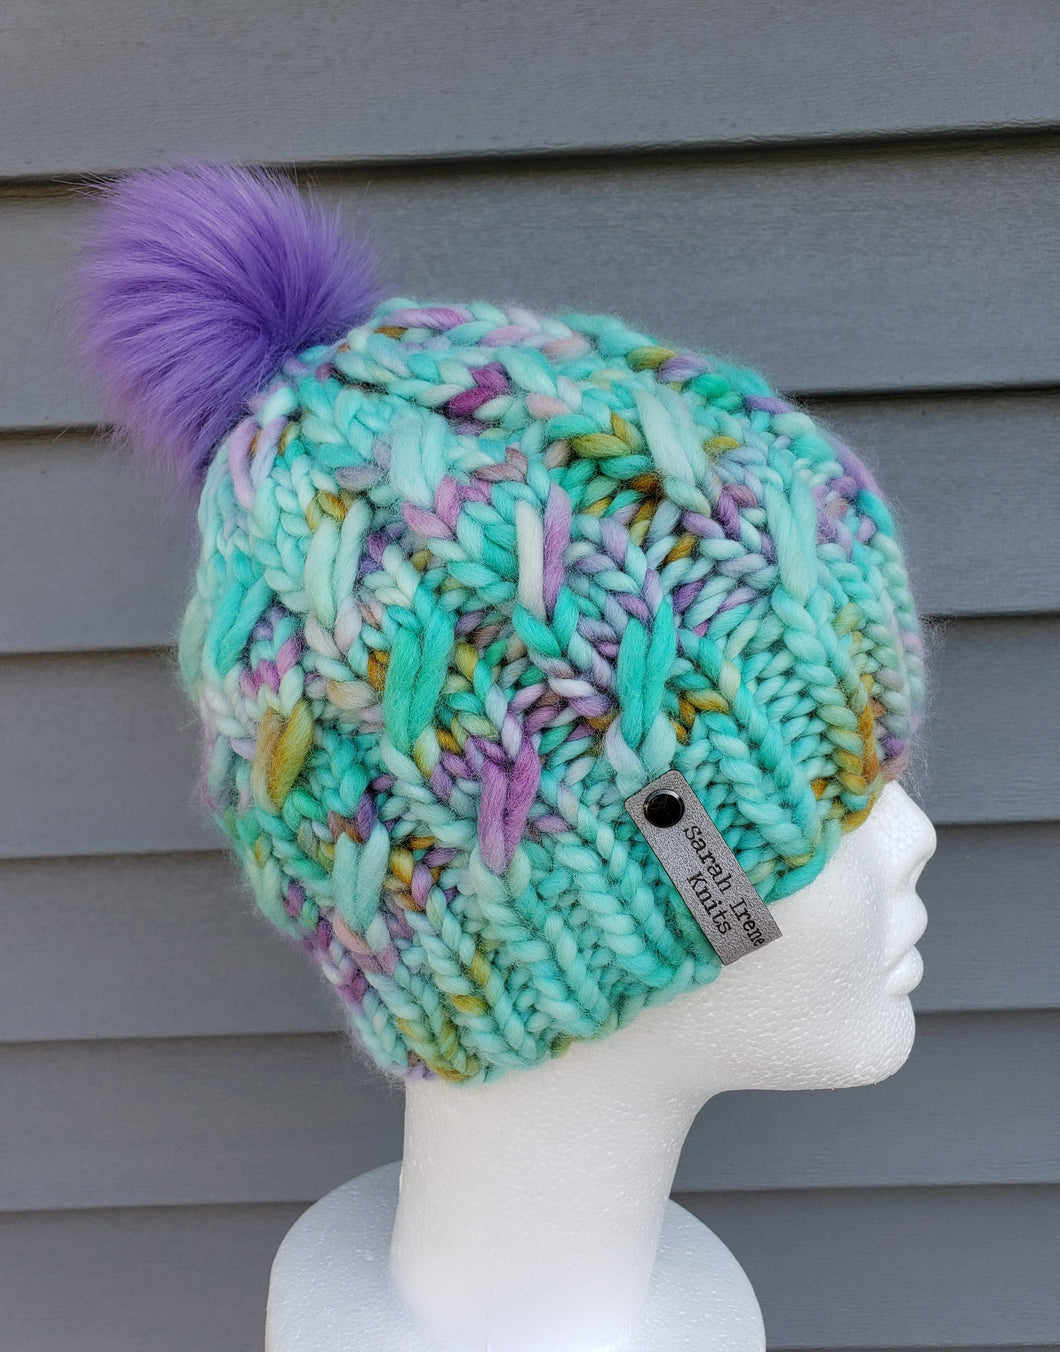 Cable effect beanie in teal with speckles of purple, yellow, and pink. Purple pom on top.